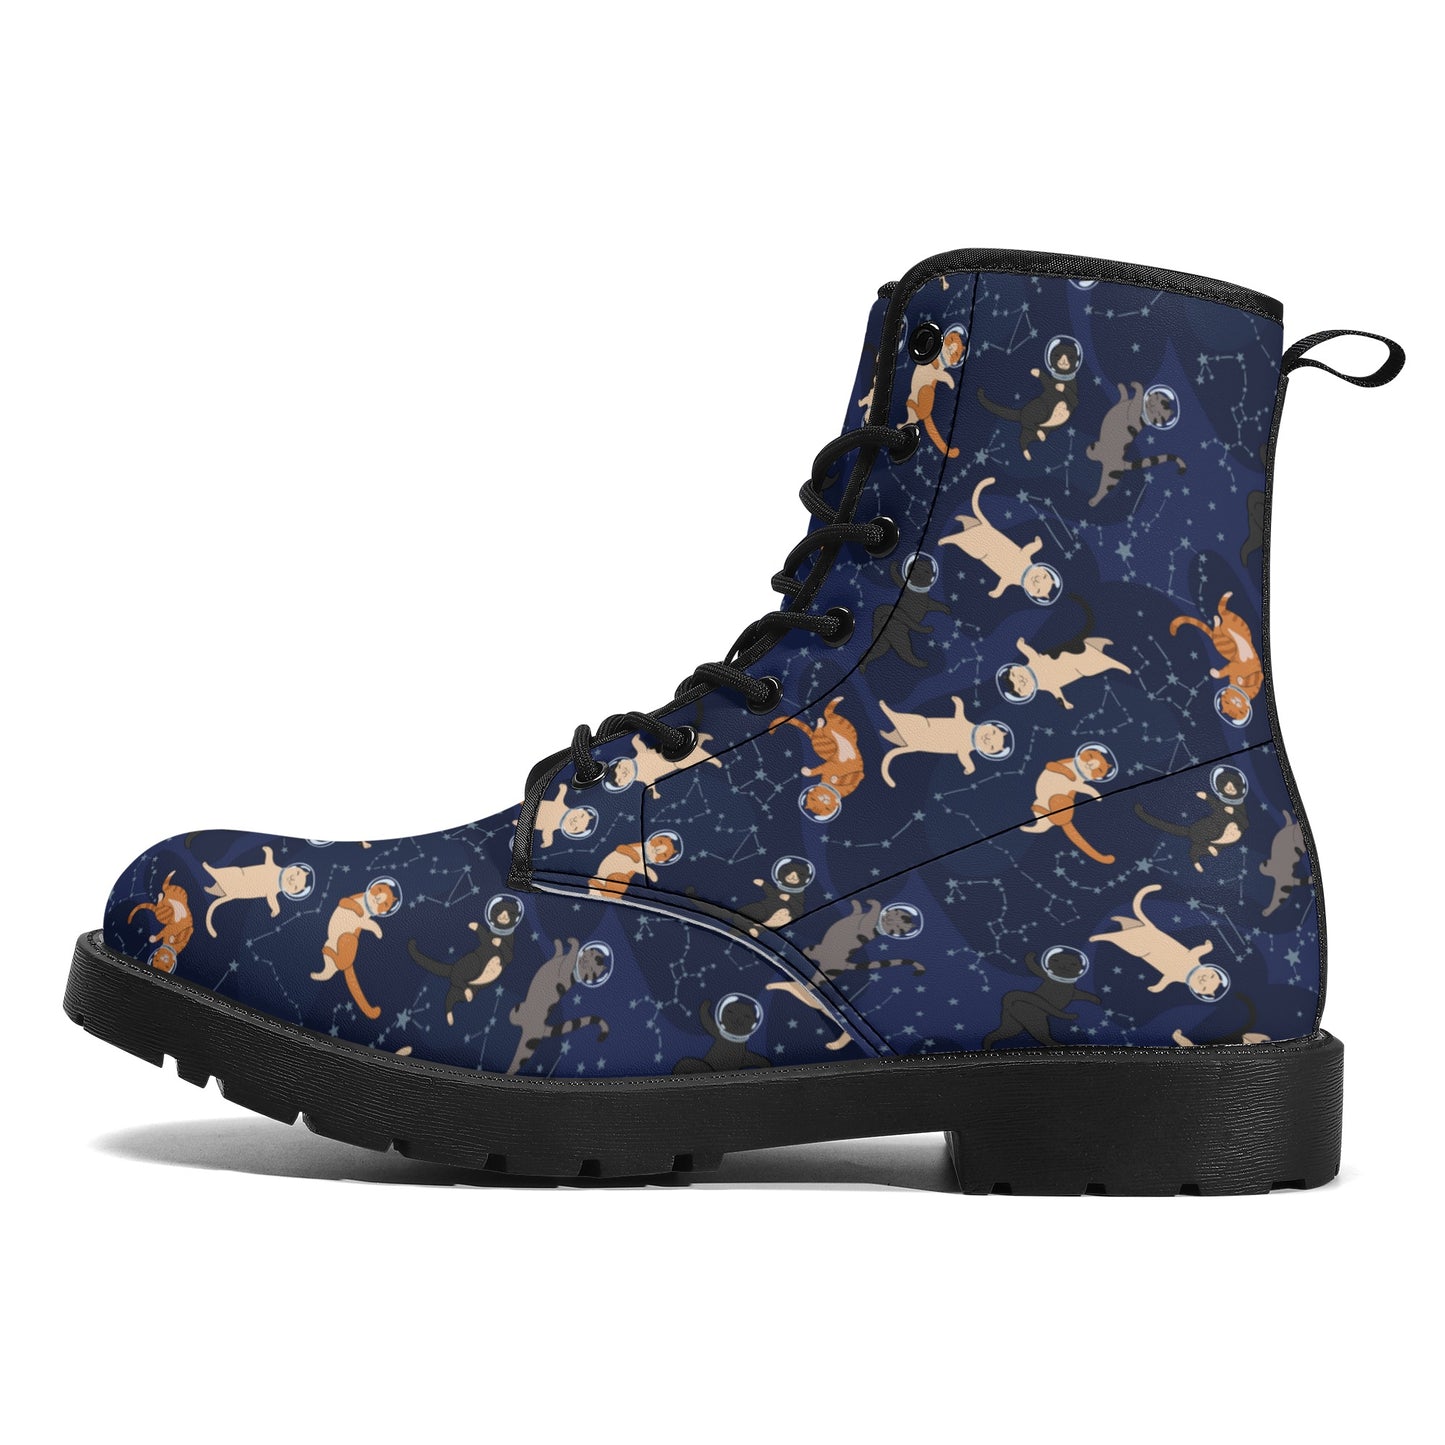 Galaxy Cats in Space Women Leather Boots, Constellation Vegan Lace Up Shoes Hiking Festival Black Ankle Combat Work Waterproof Custom Ladies